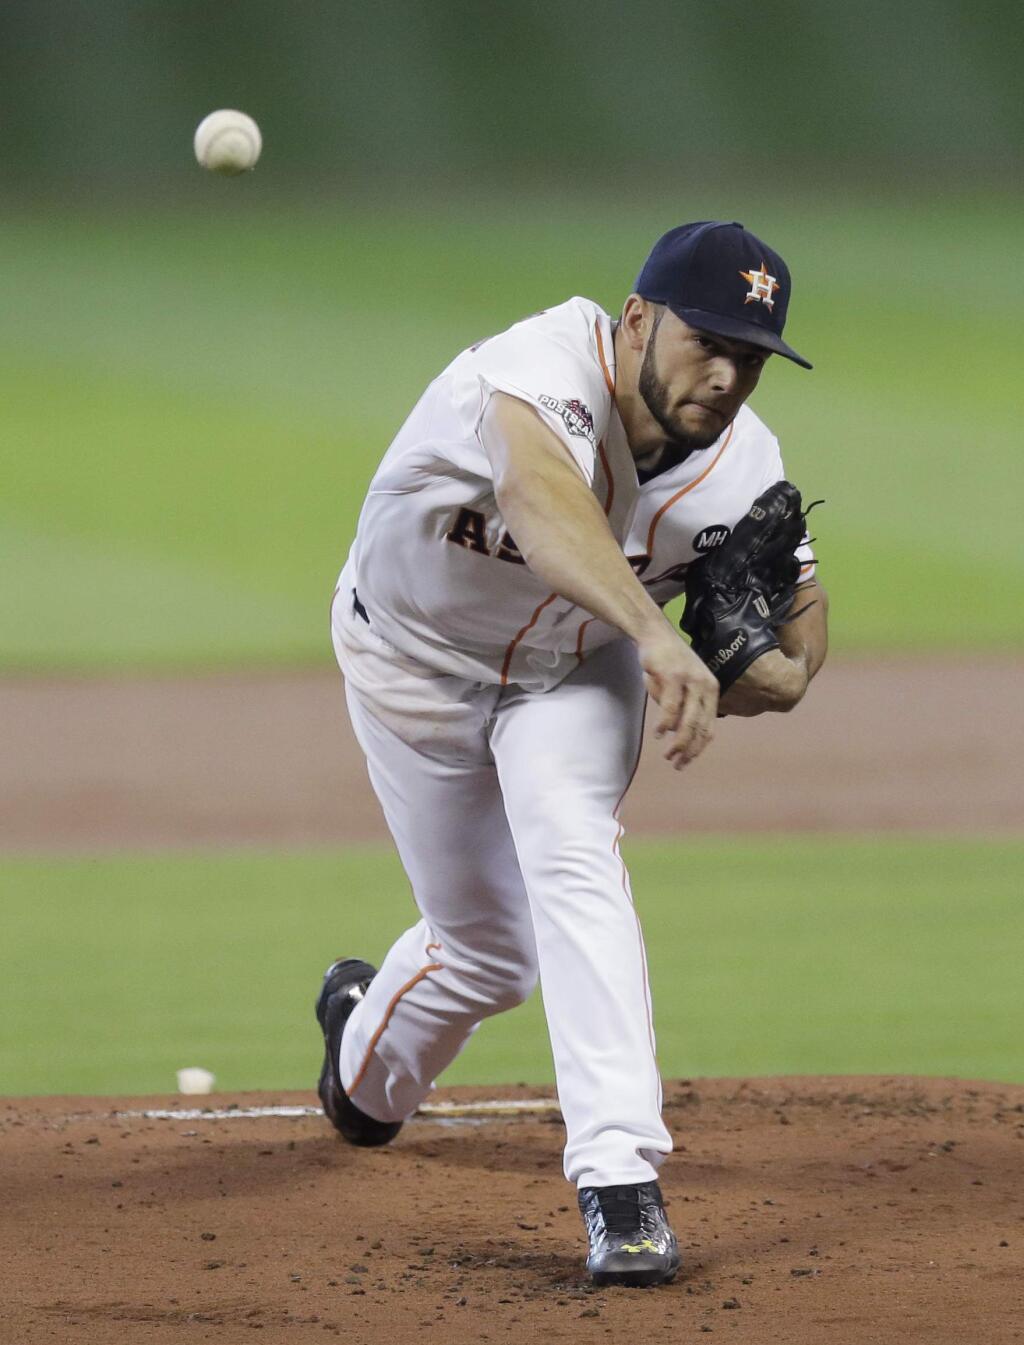 Houston Astros' Lance McCullers (43) delivers a pitch against the Kansas City Royals during the first inning in Game 4 of baseball's American League Division Series, Monday, Oct. 12, 2015, in Houston. (AP Photo/Tim Sharp)